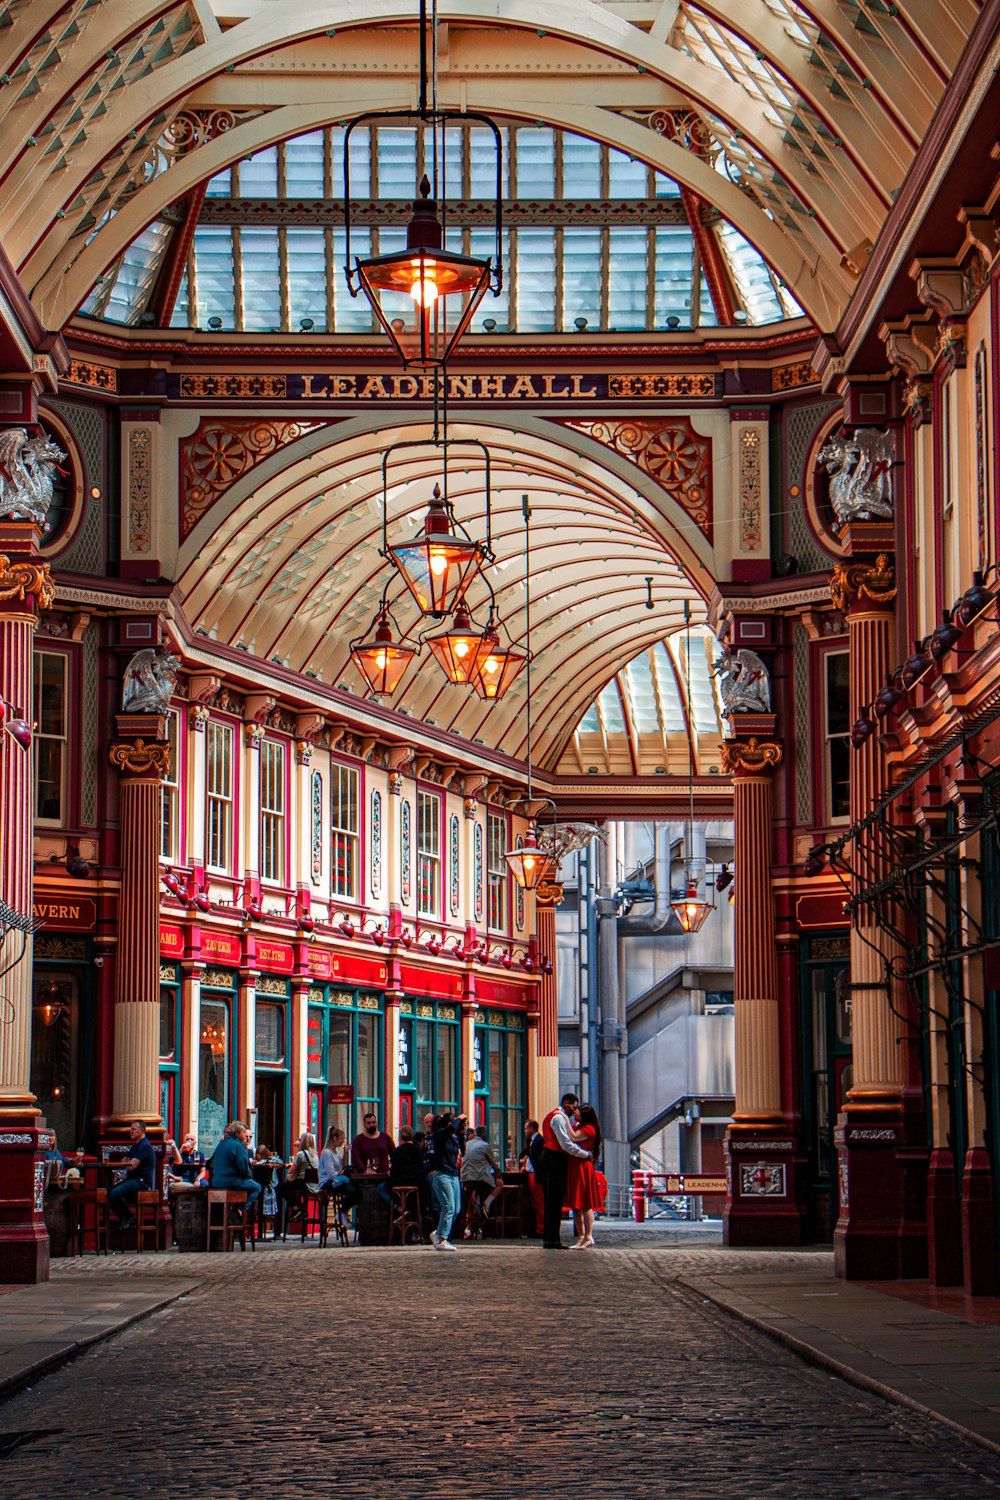 a large ornate building with many windows with Leadenhall Market in the background